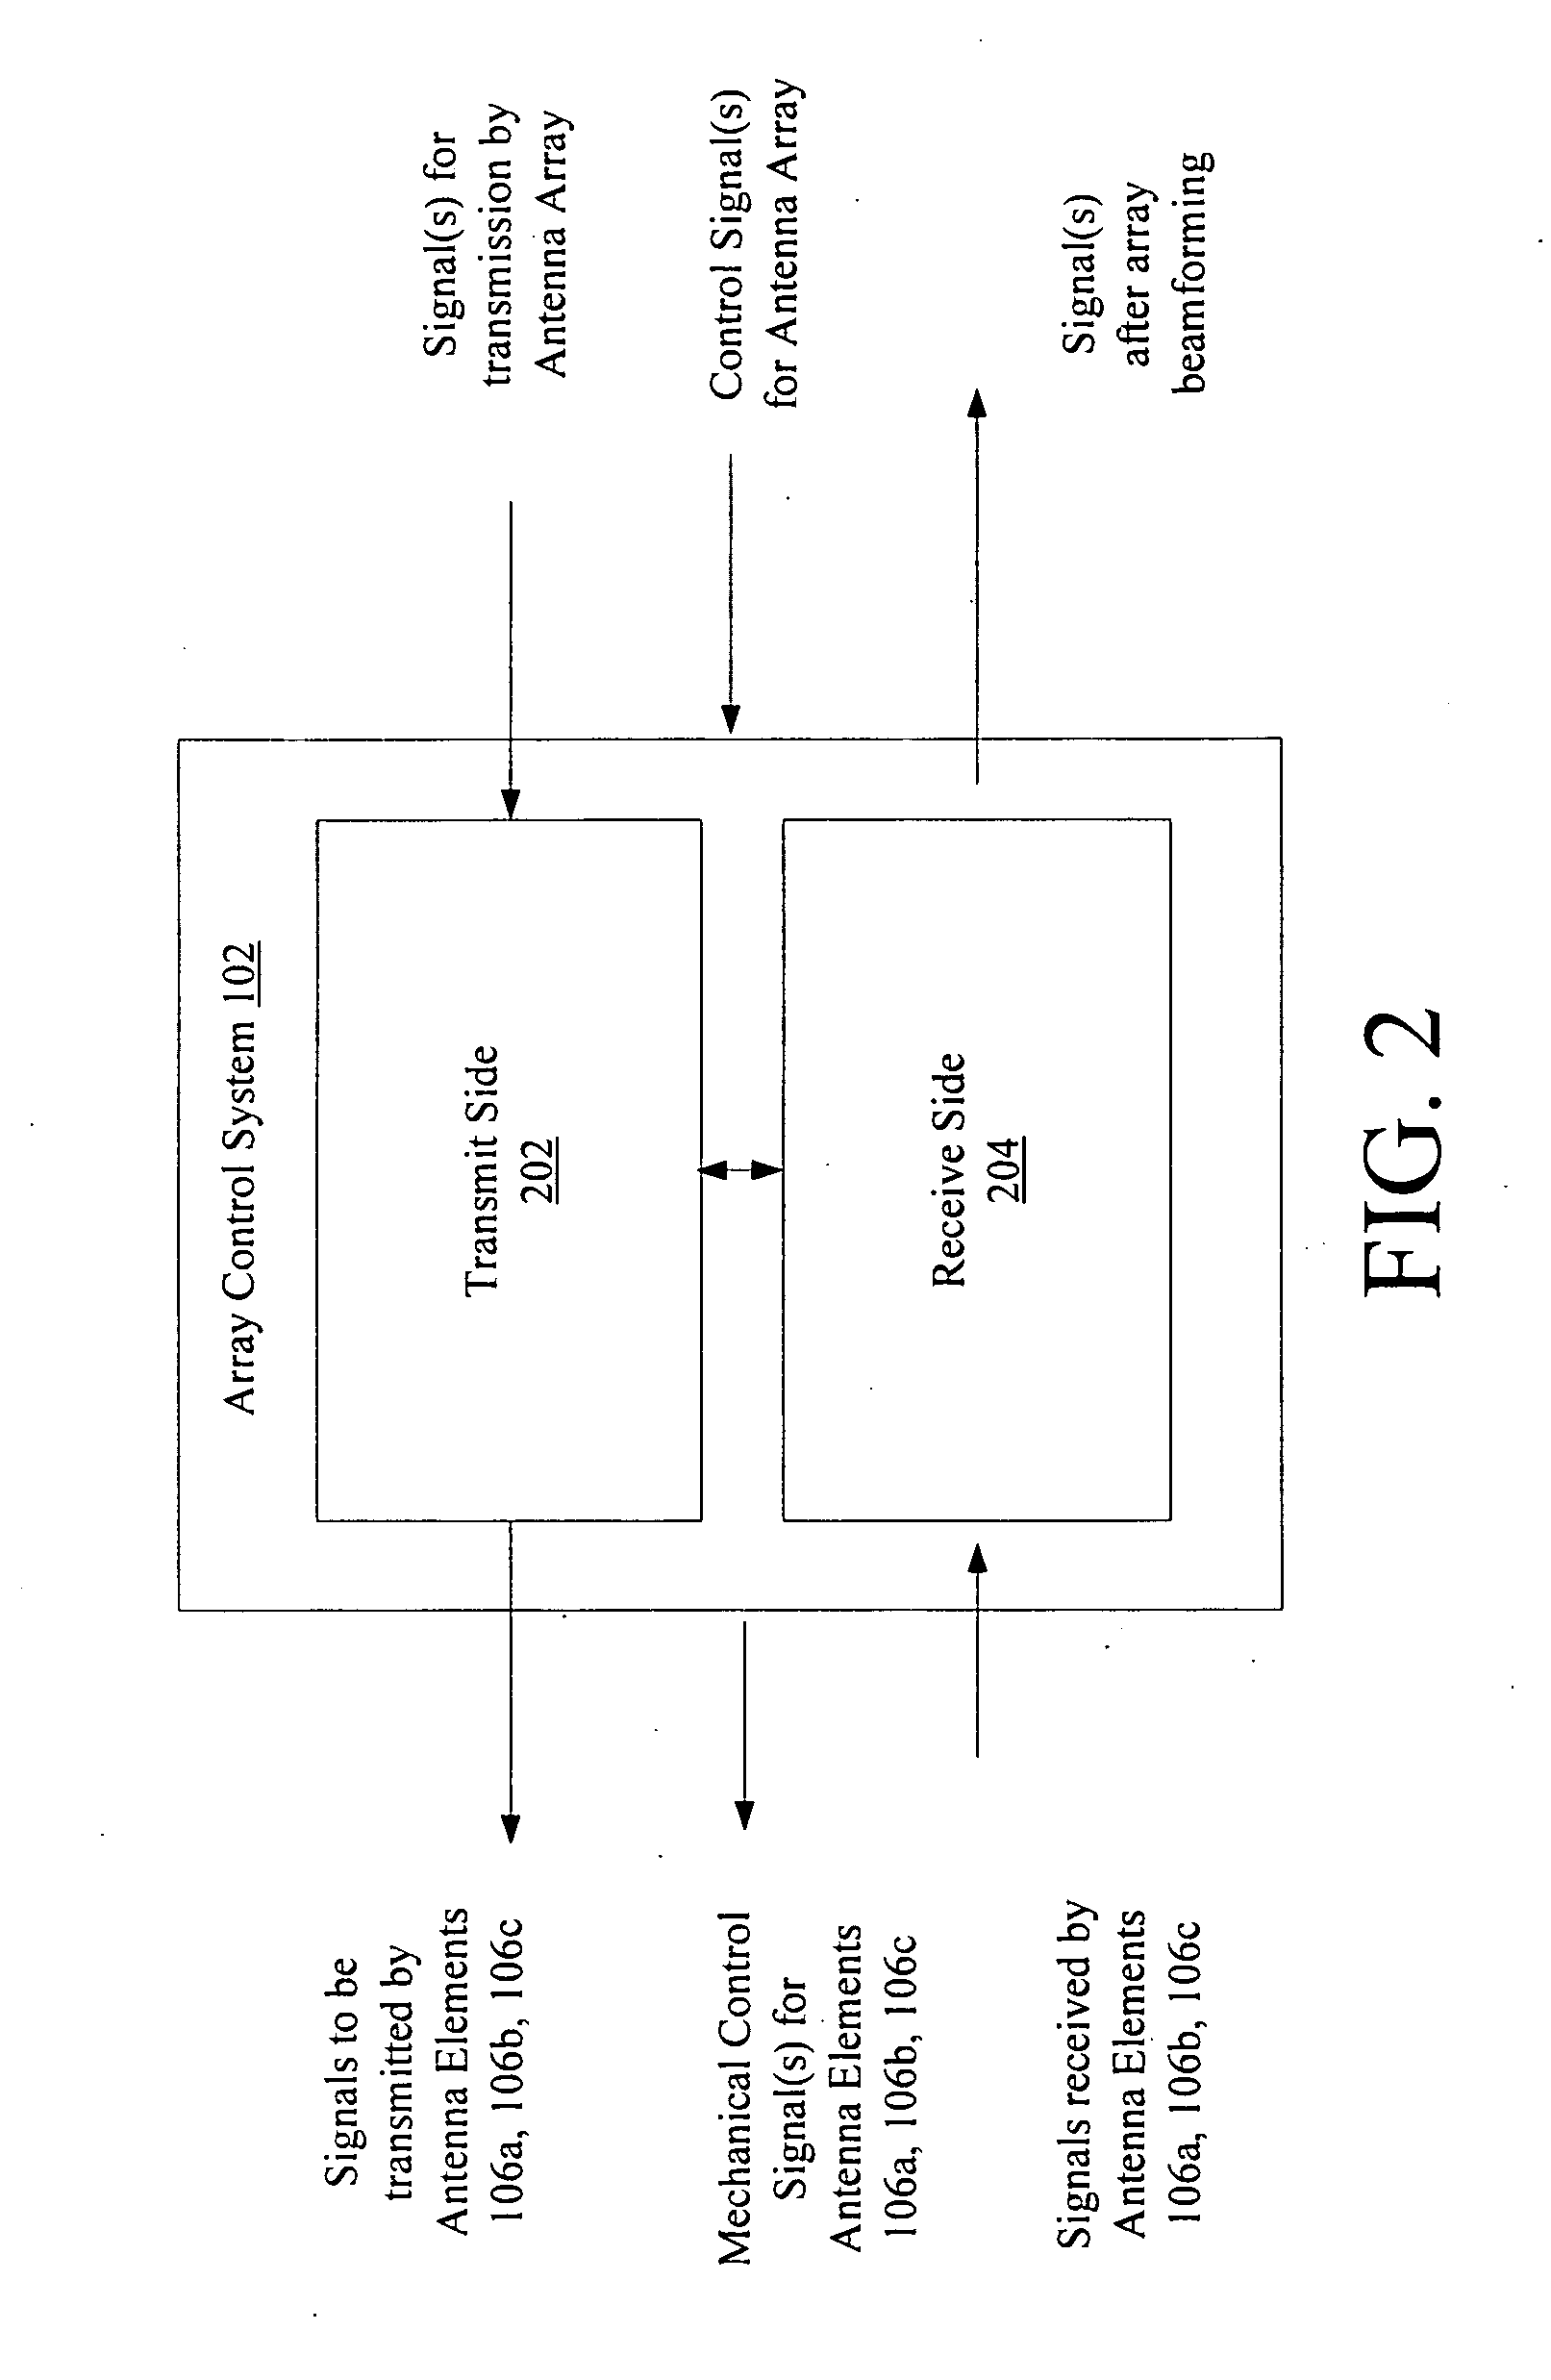 Systems and methods for determining element phase center locations for an array of antenna elements